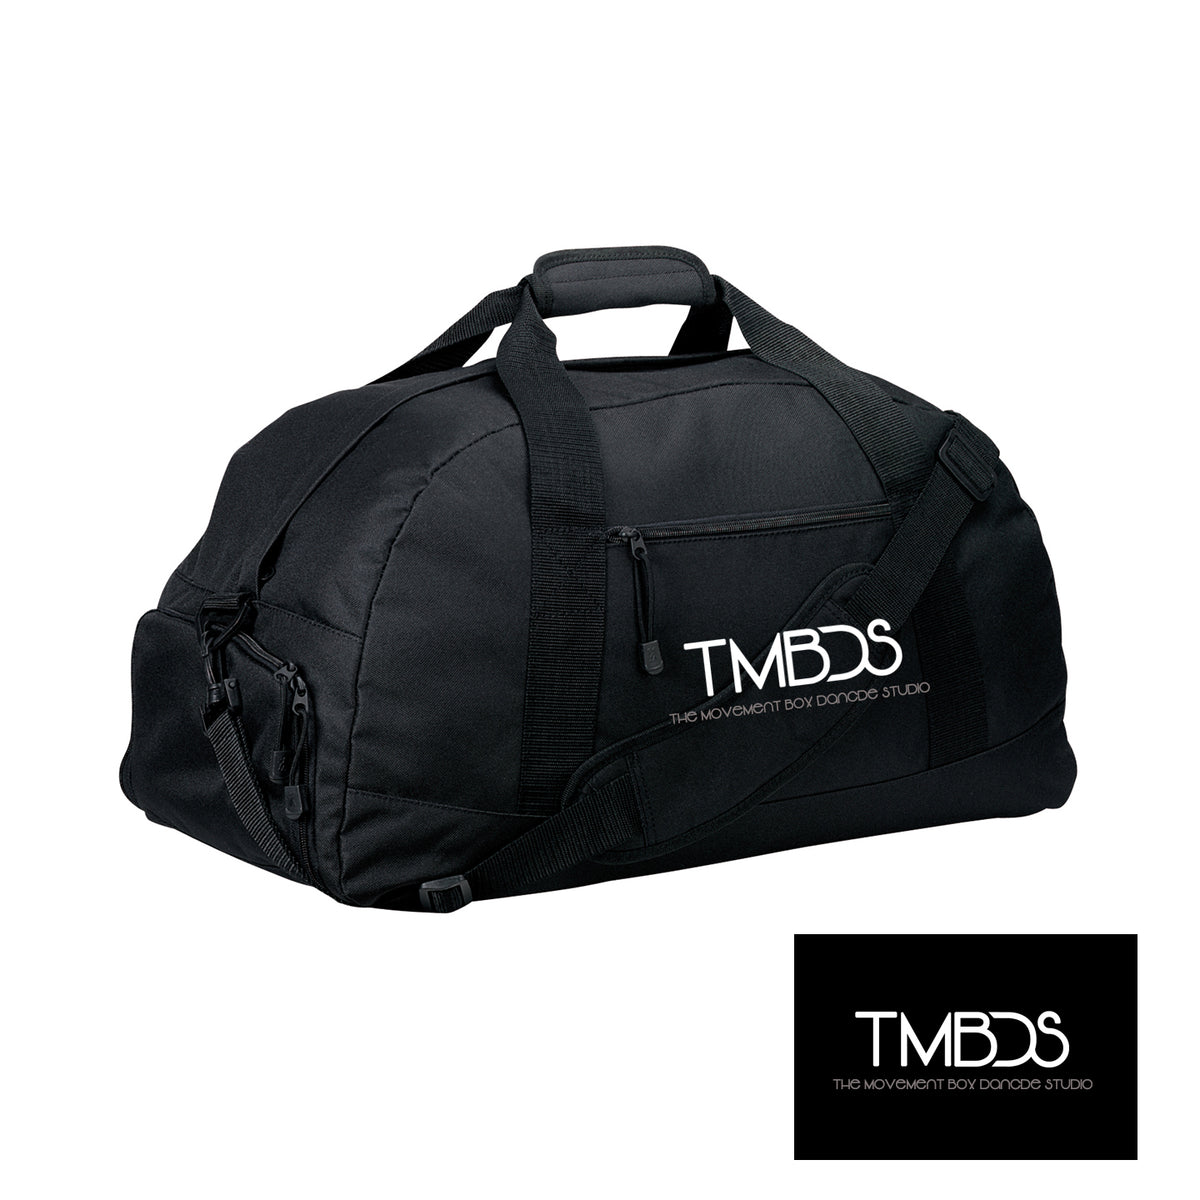 TMBDS Embroidered Duffel Bag